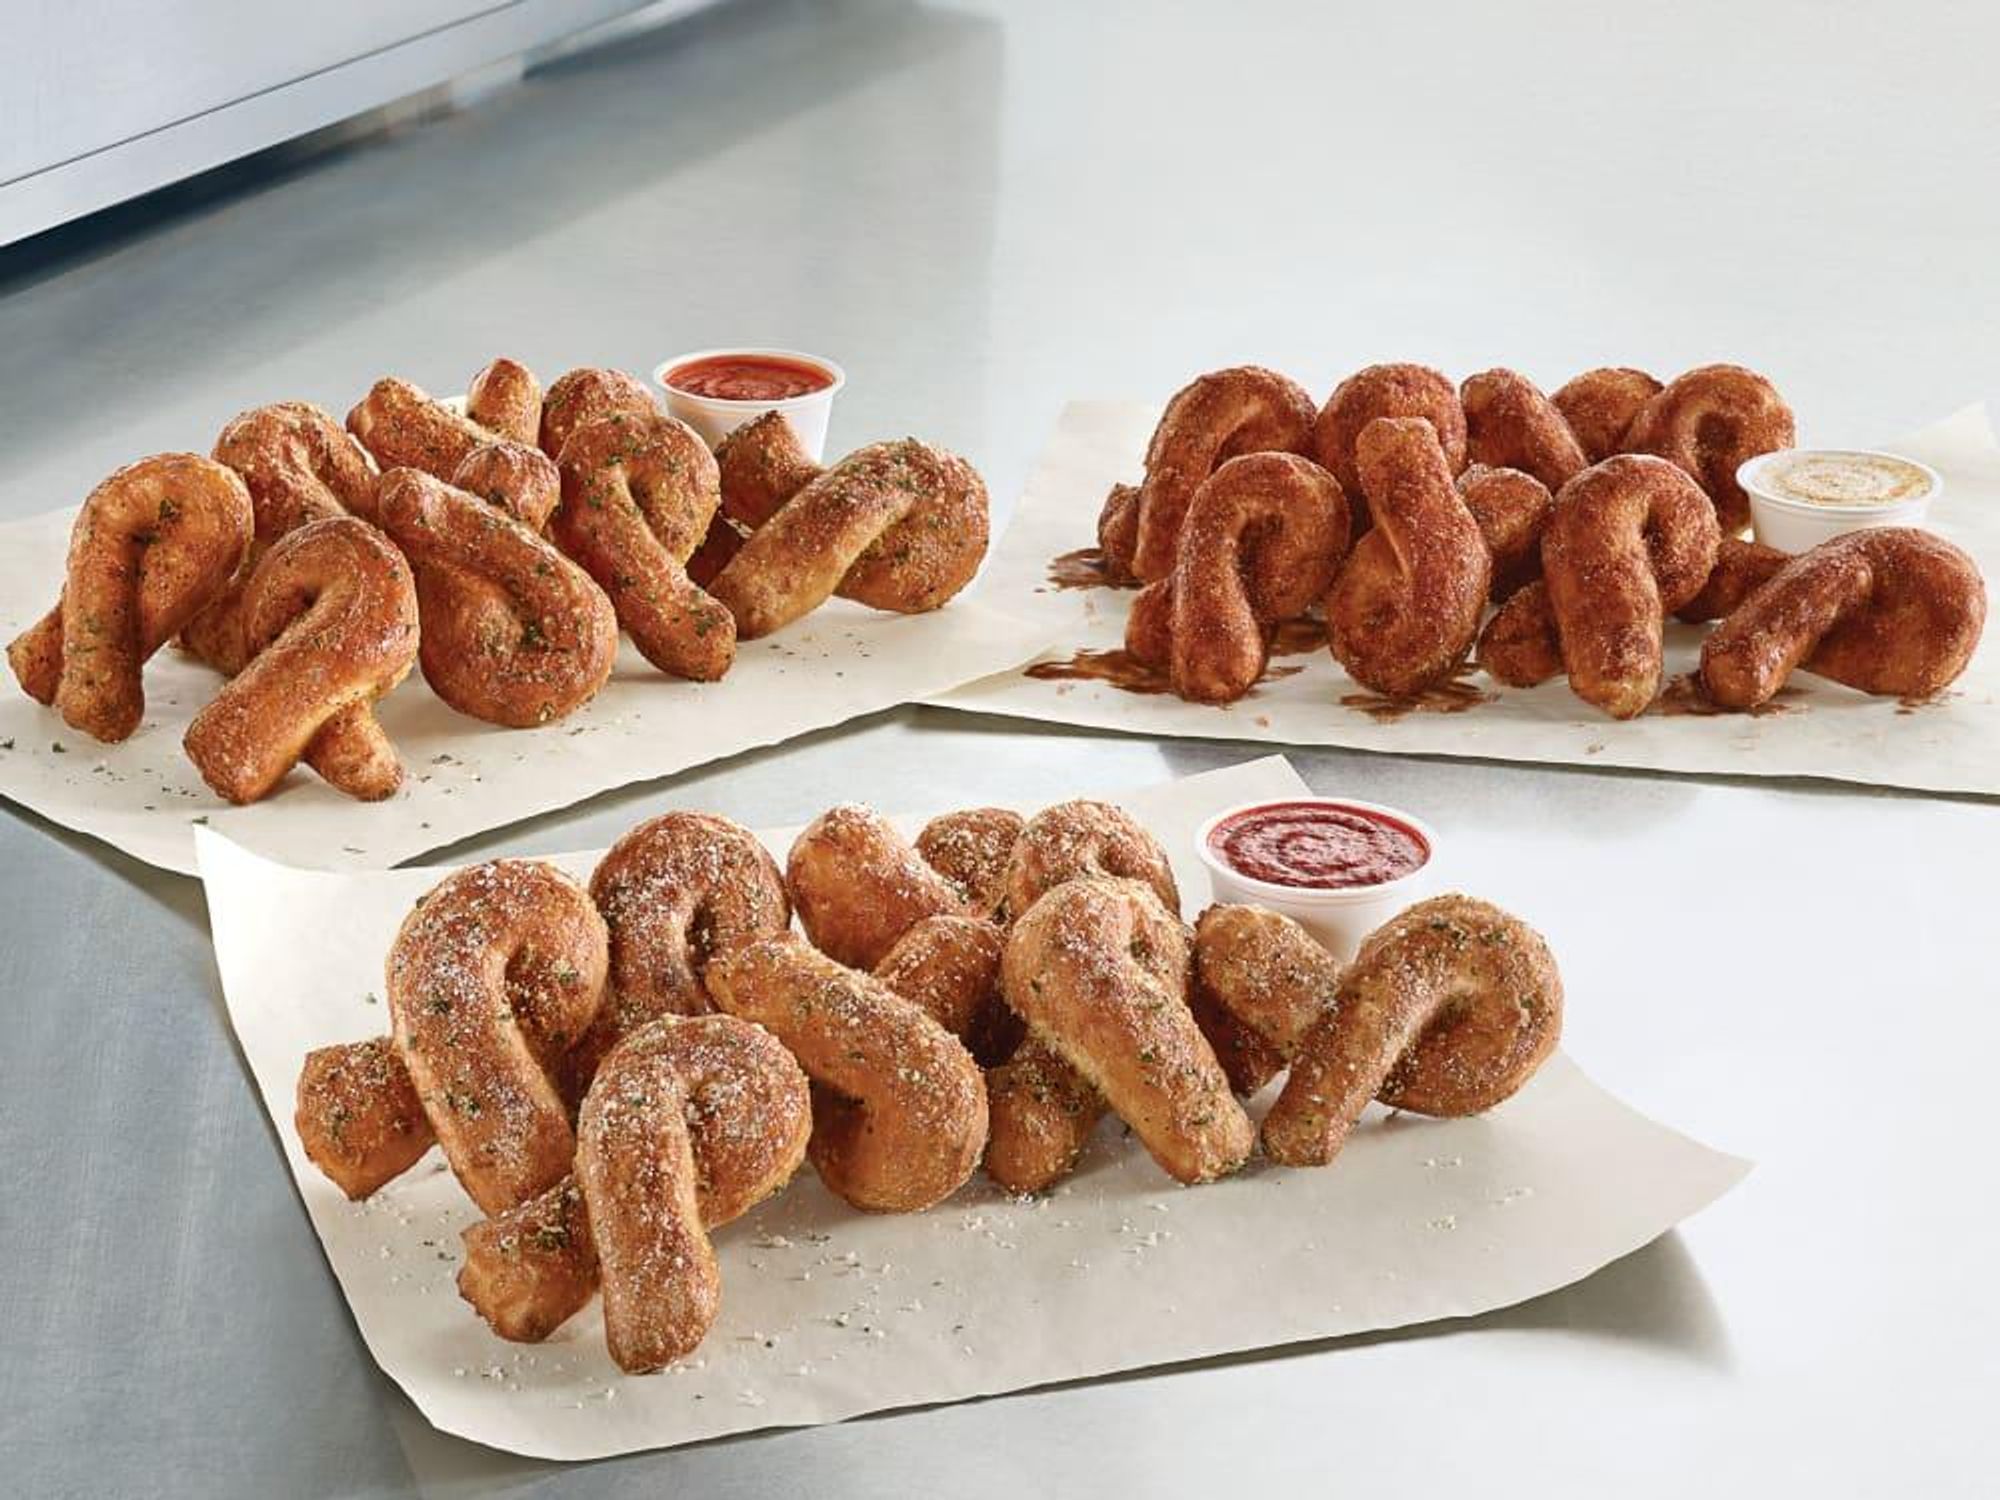 Domino's debuts addictively tasty new Bread Twists - CultureMap Fort Worth